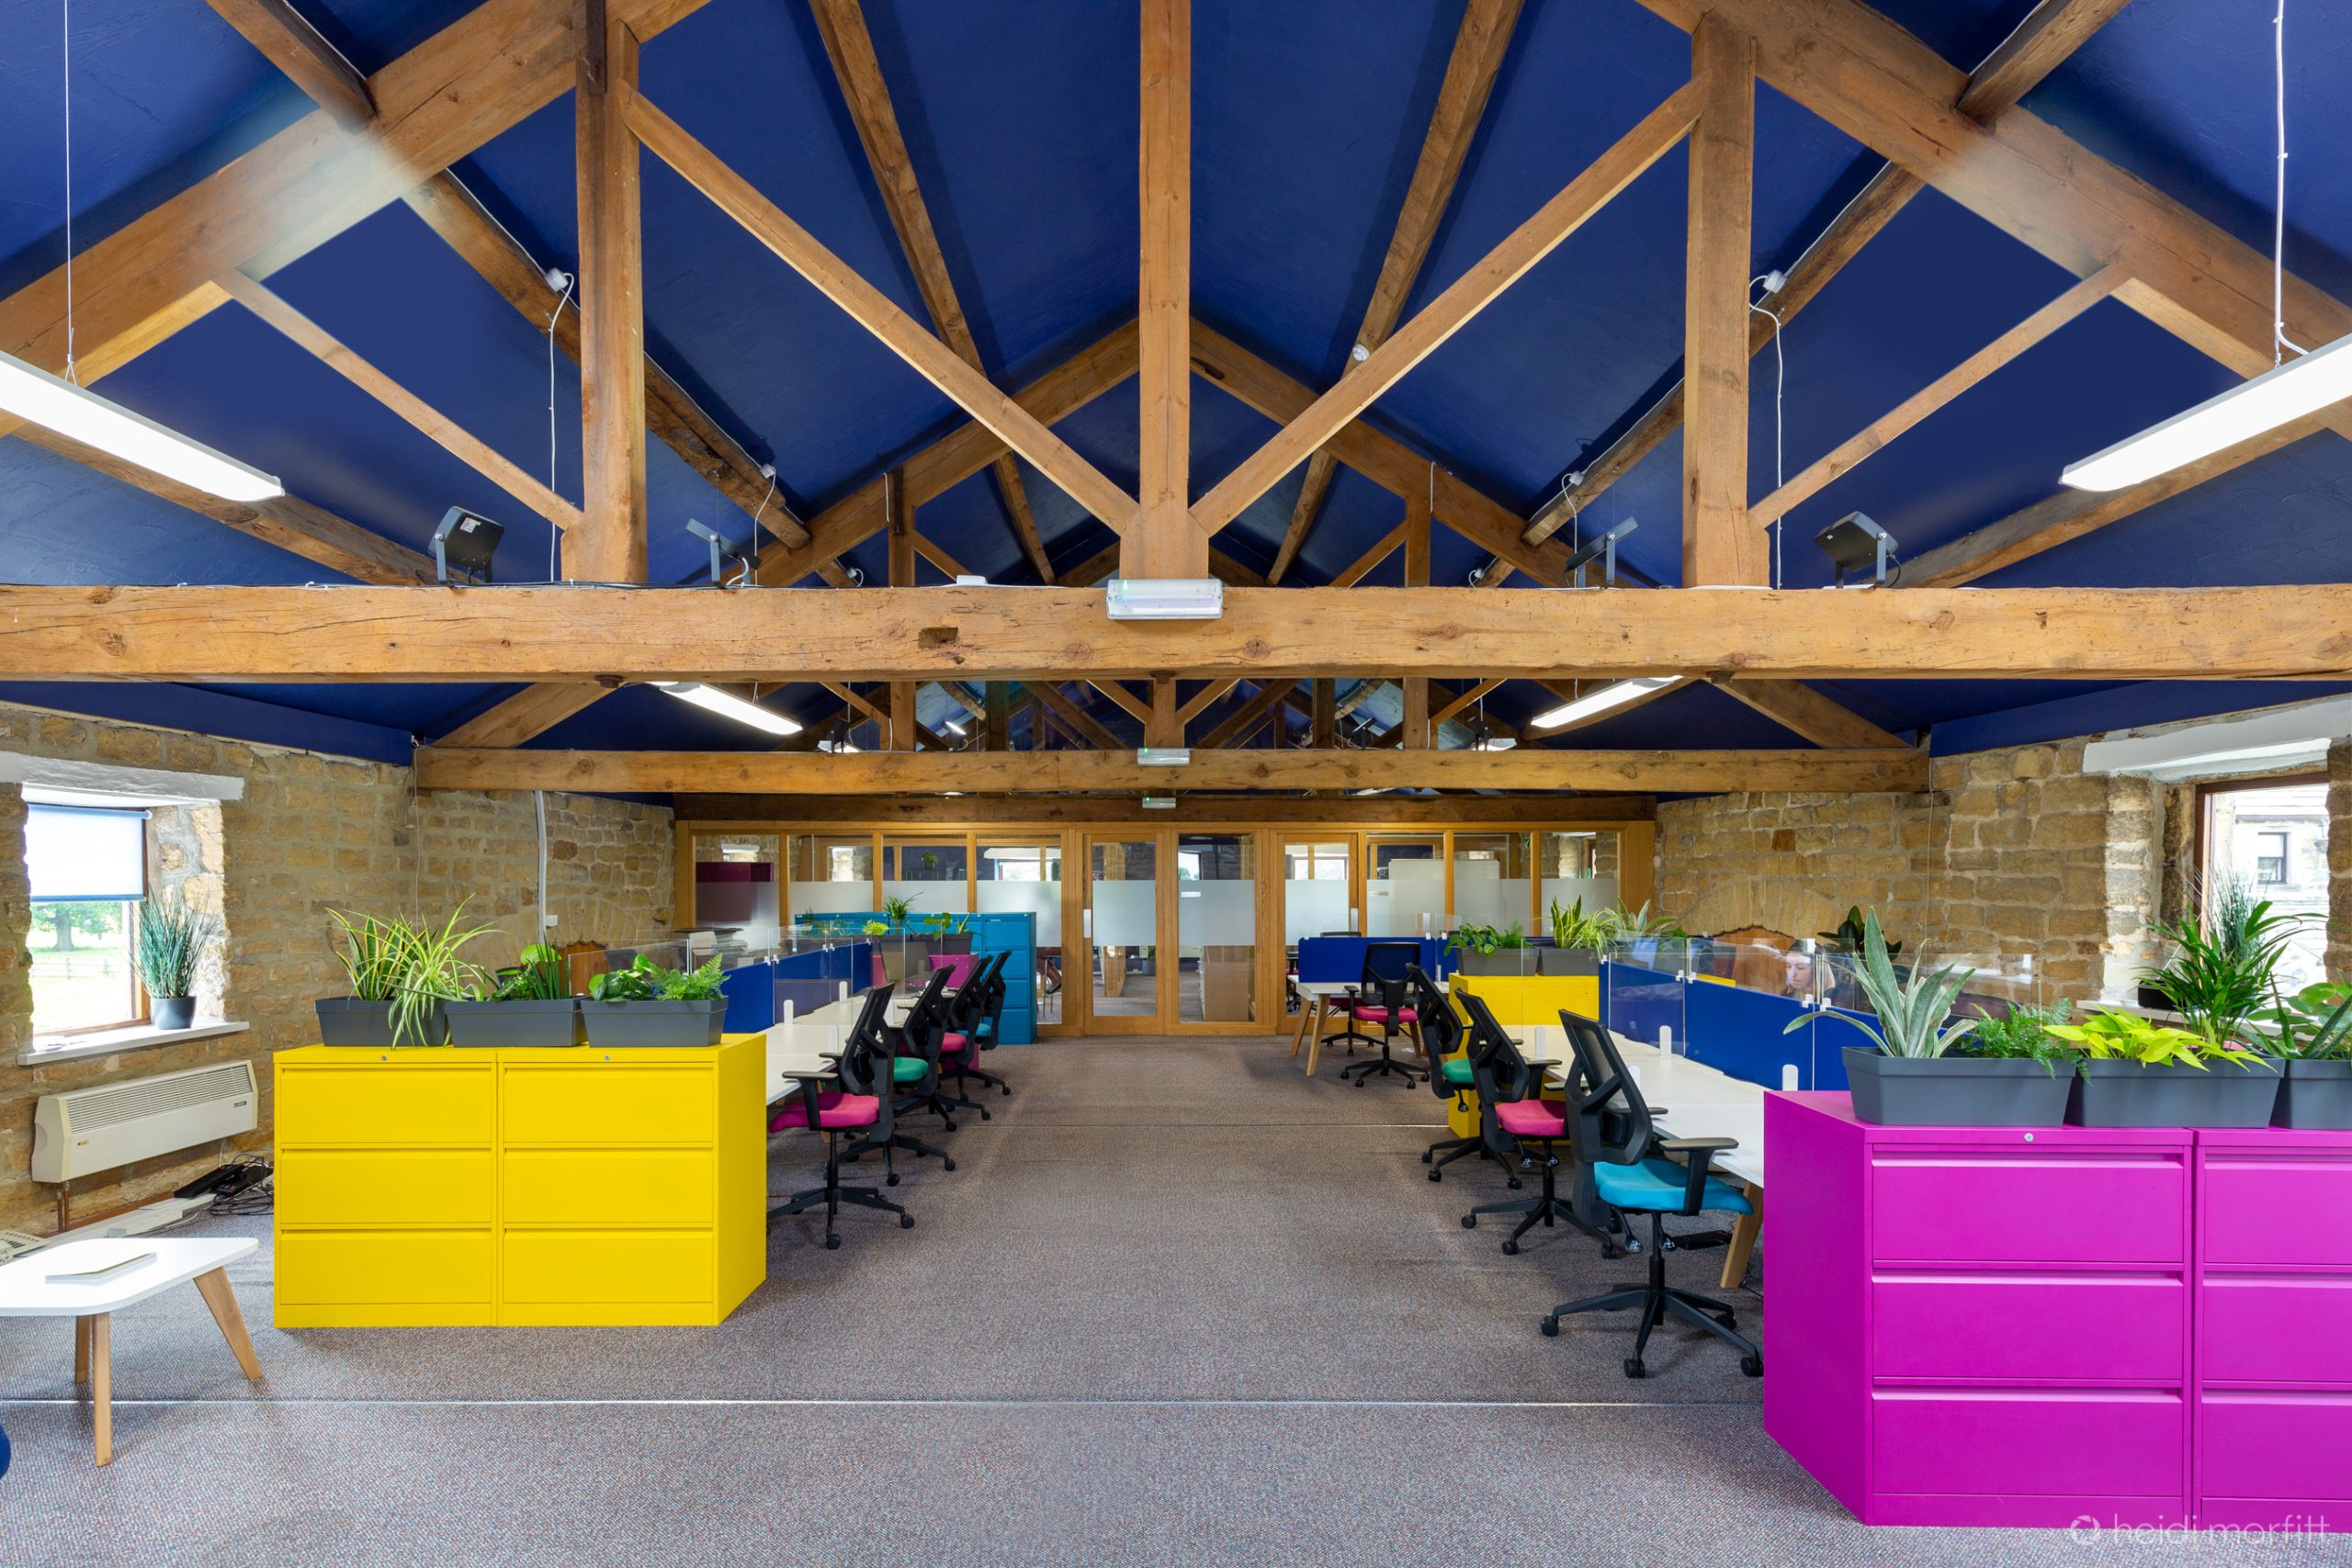 How to bring colour and vibrancy into the office